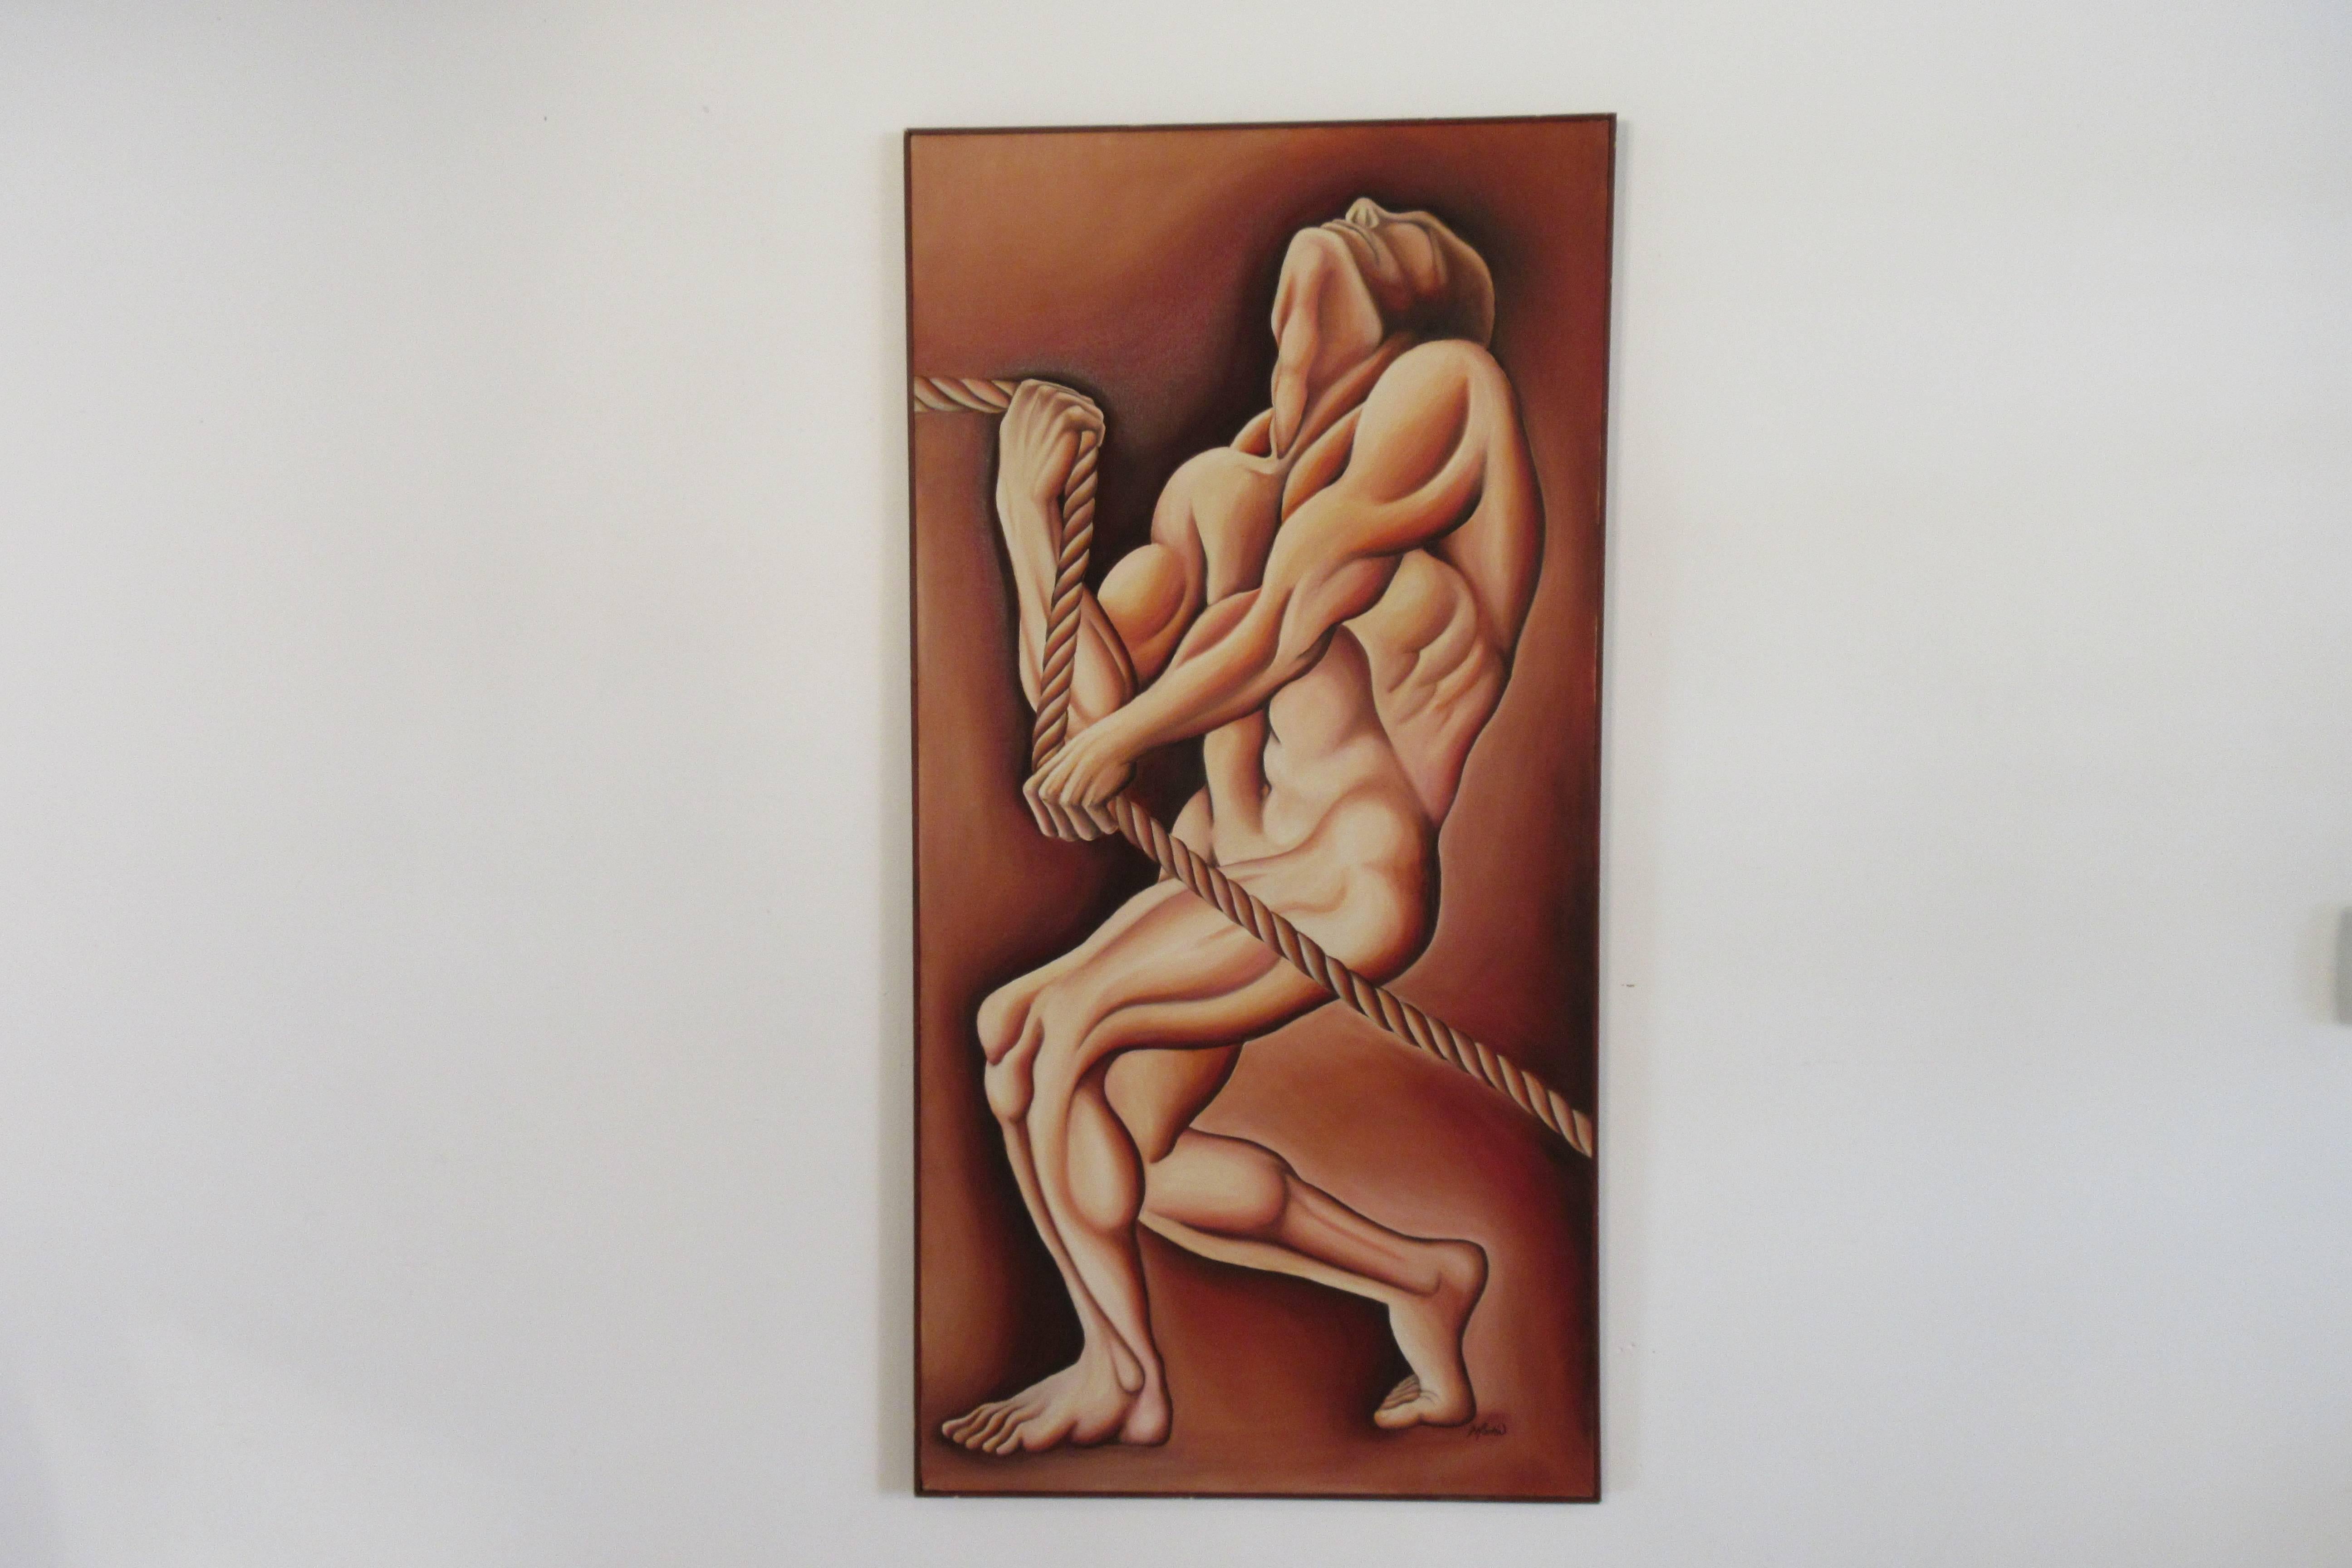 1970s oil on canvas man pulling rope.